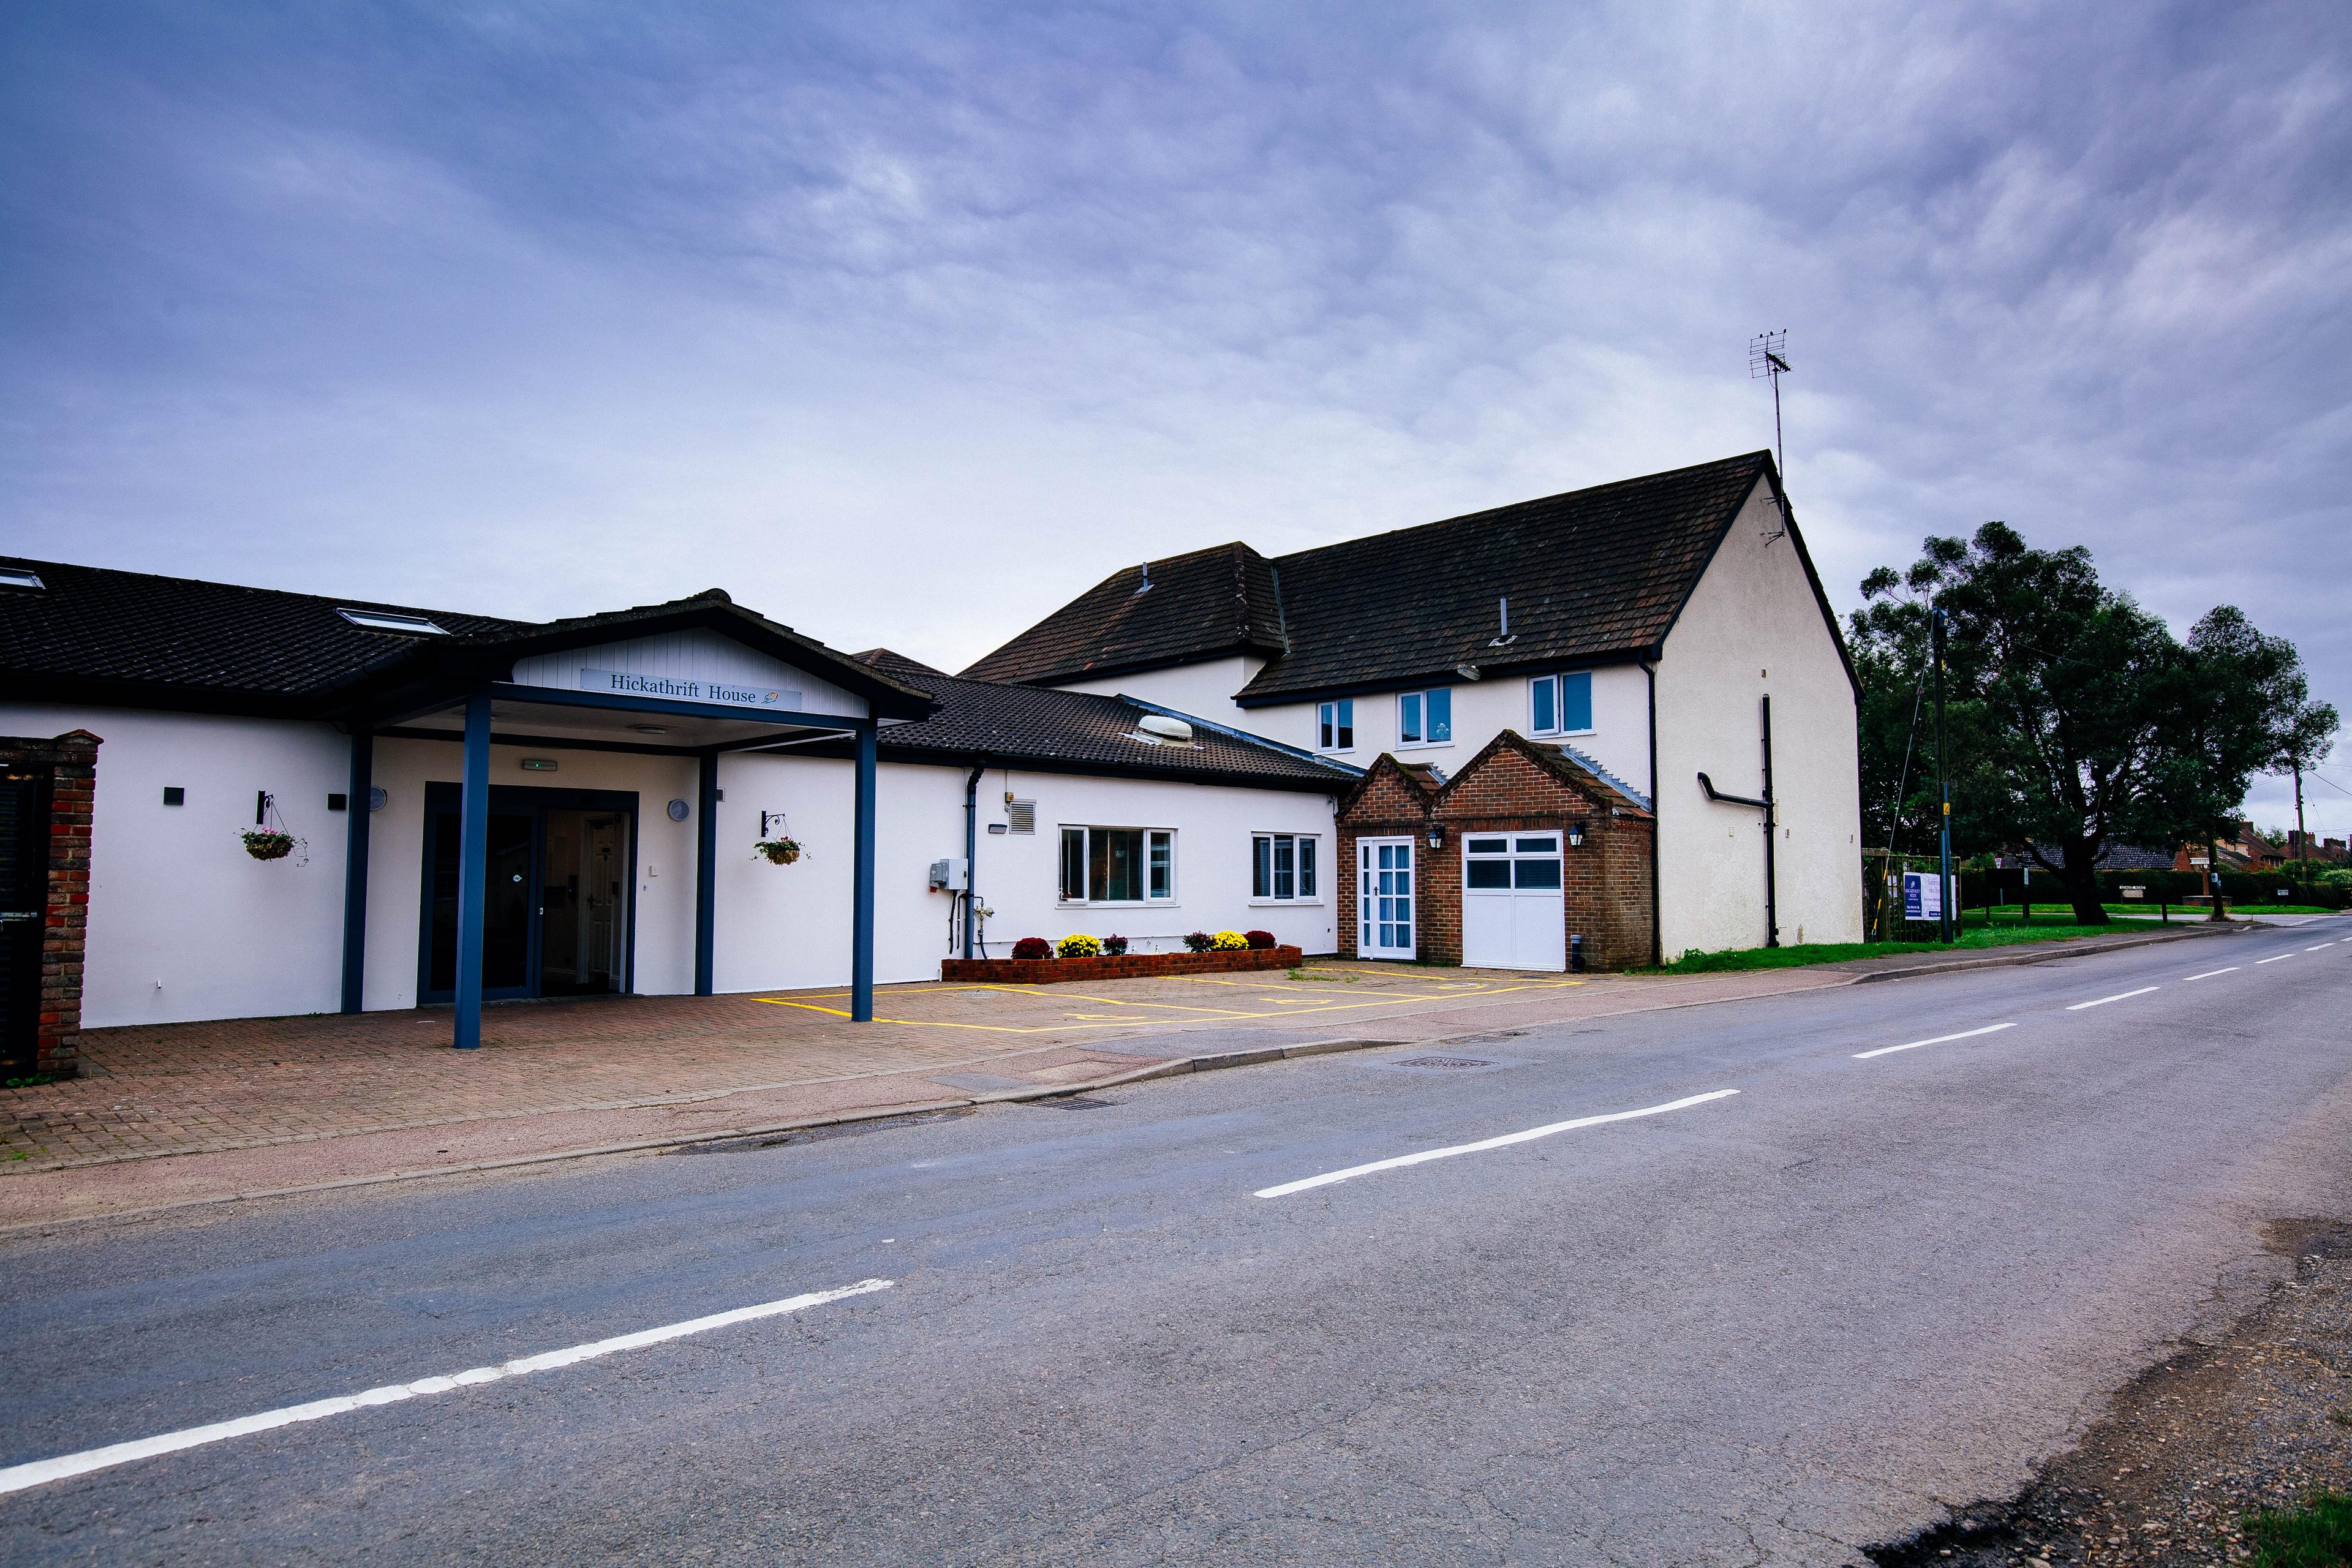 Hickathrift House Care Home